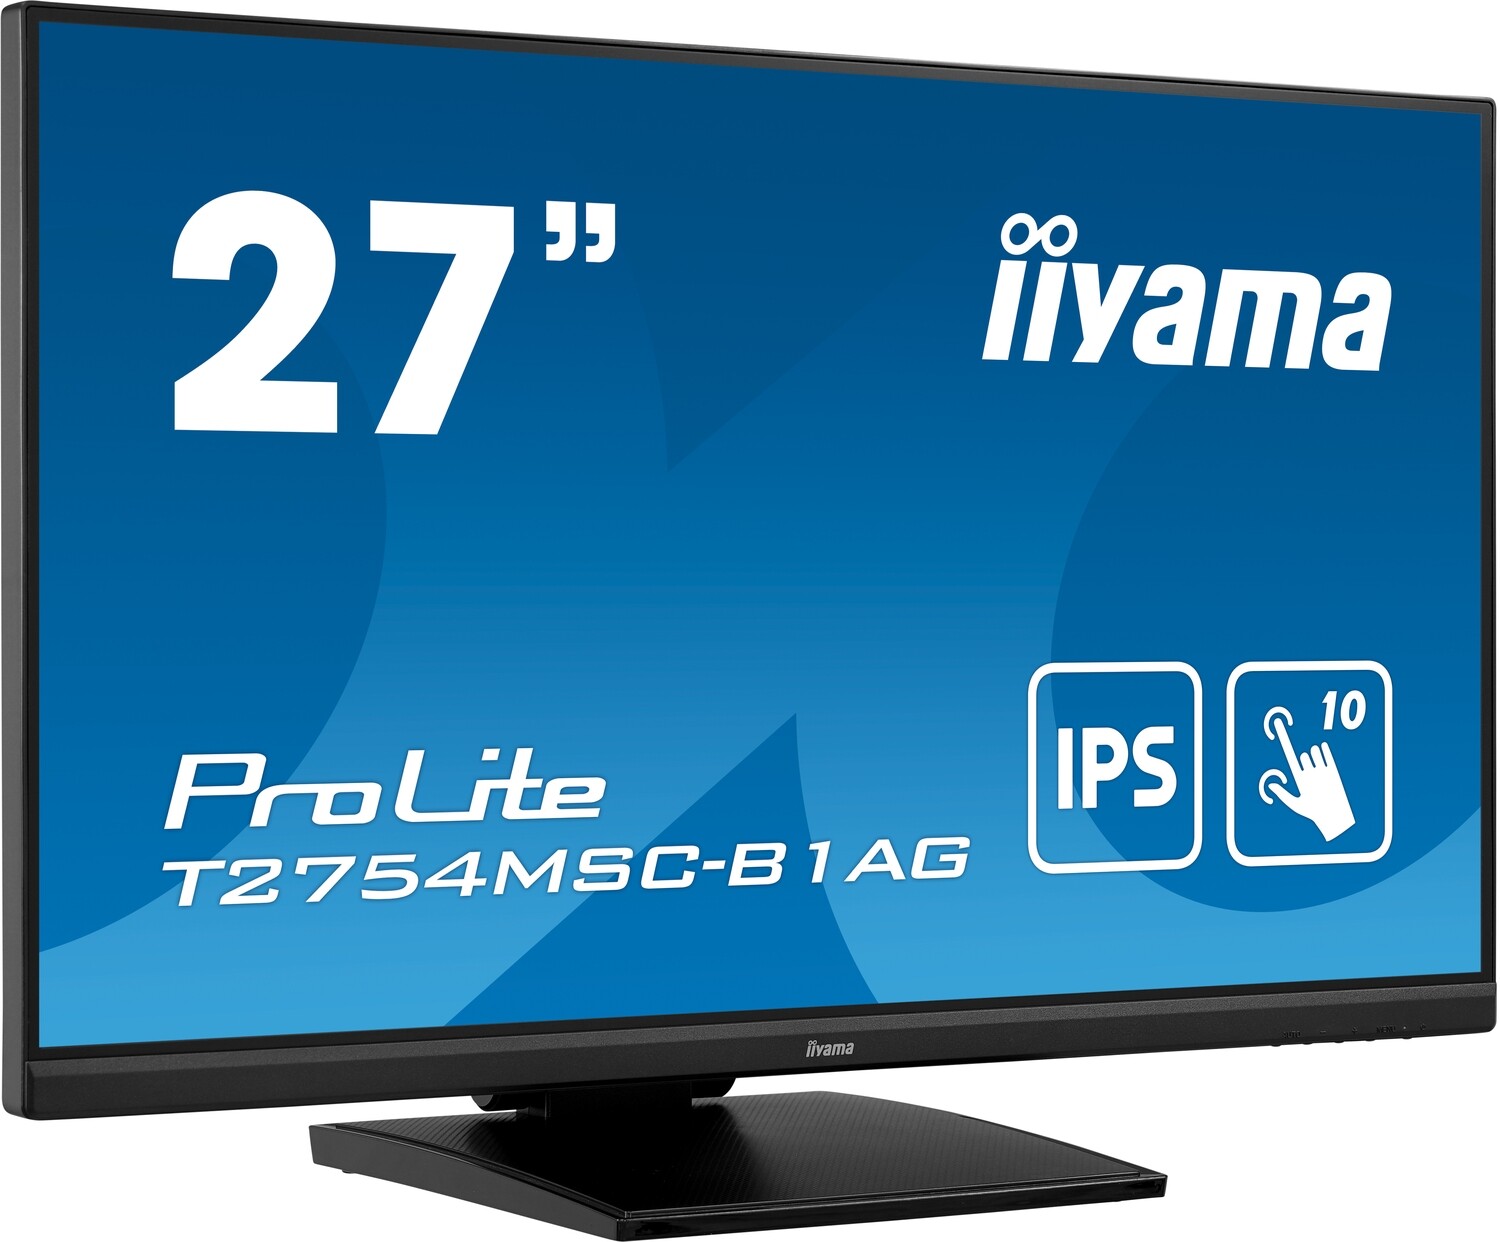 IIYAMA Monitor 27" PCAP 10P Touch, 1920x1080, IPS panel, Flat Bezel Free Glass Front, VGA, HDMI, DisplayPort, 255cd/m² (with touch), USB 3.0-Hub (2xOut), 1000:1 Static Contrast, 5ms, Built-in Webcam